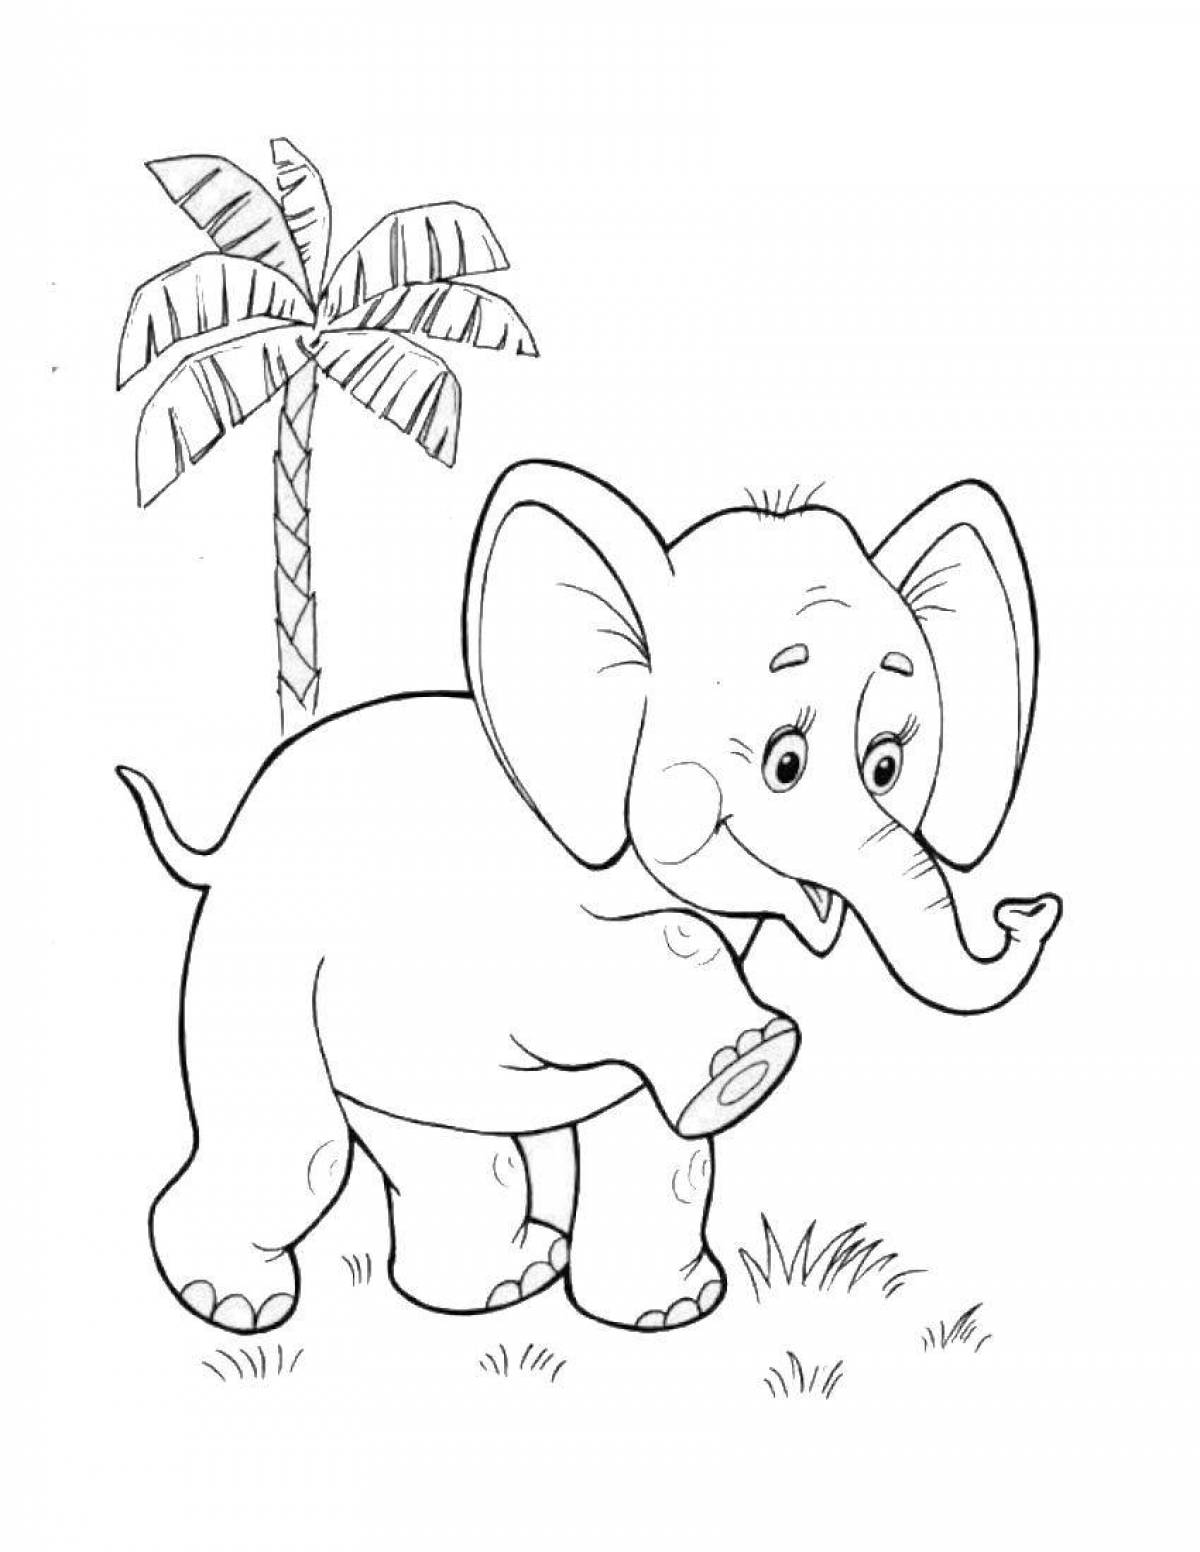 Charming coloring pages animals of hot countries for children 6 years old